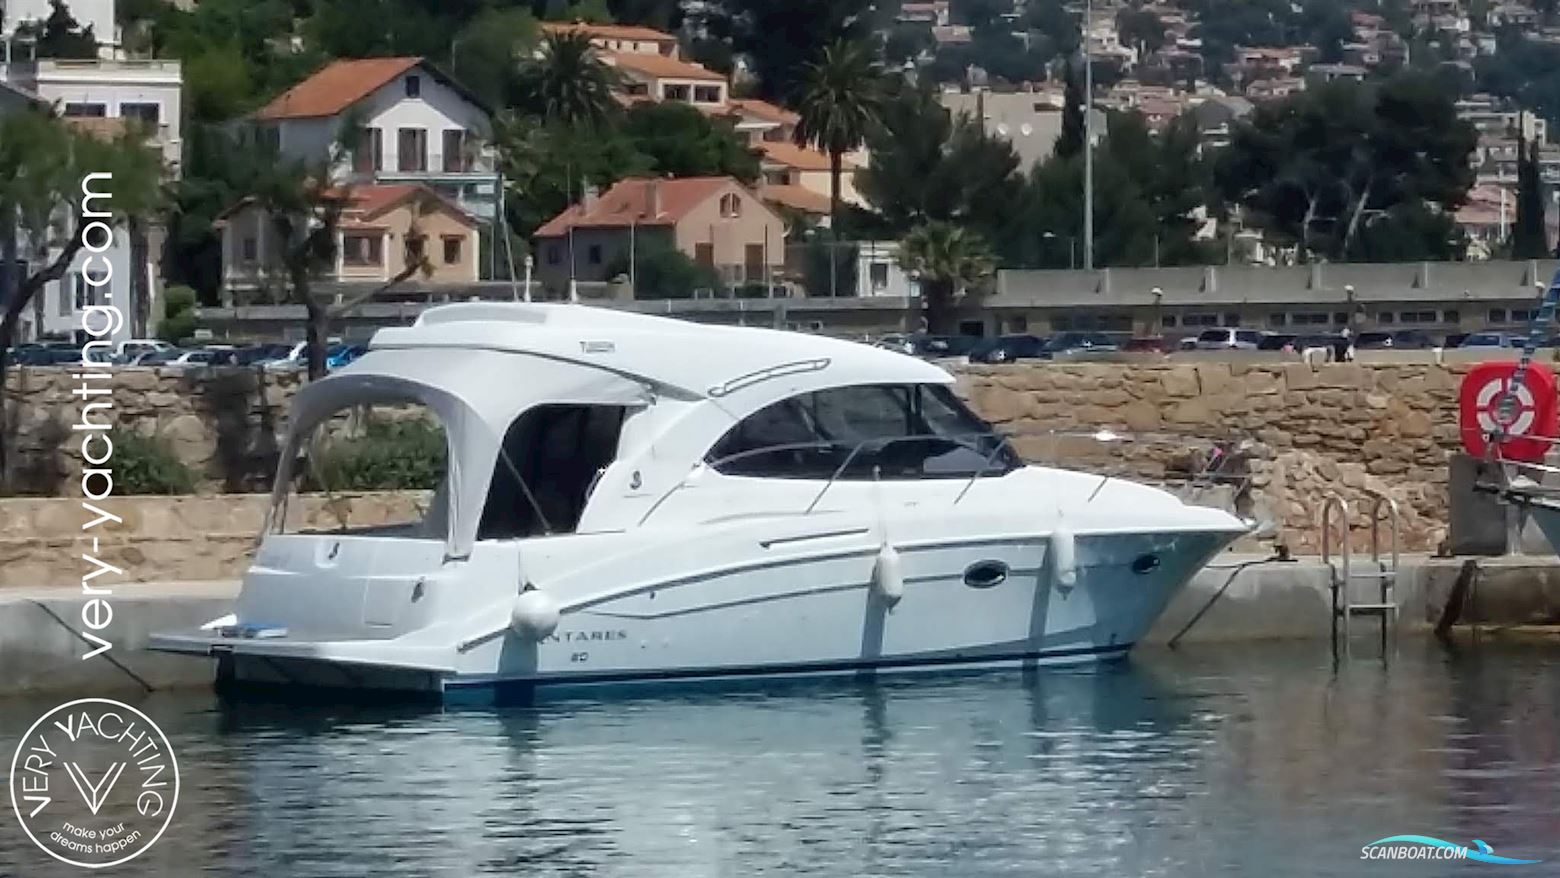 Beneteau Antares 30 S Motor boat 2011, with Volvo Penta D6-370 engine, France